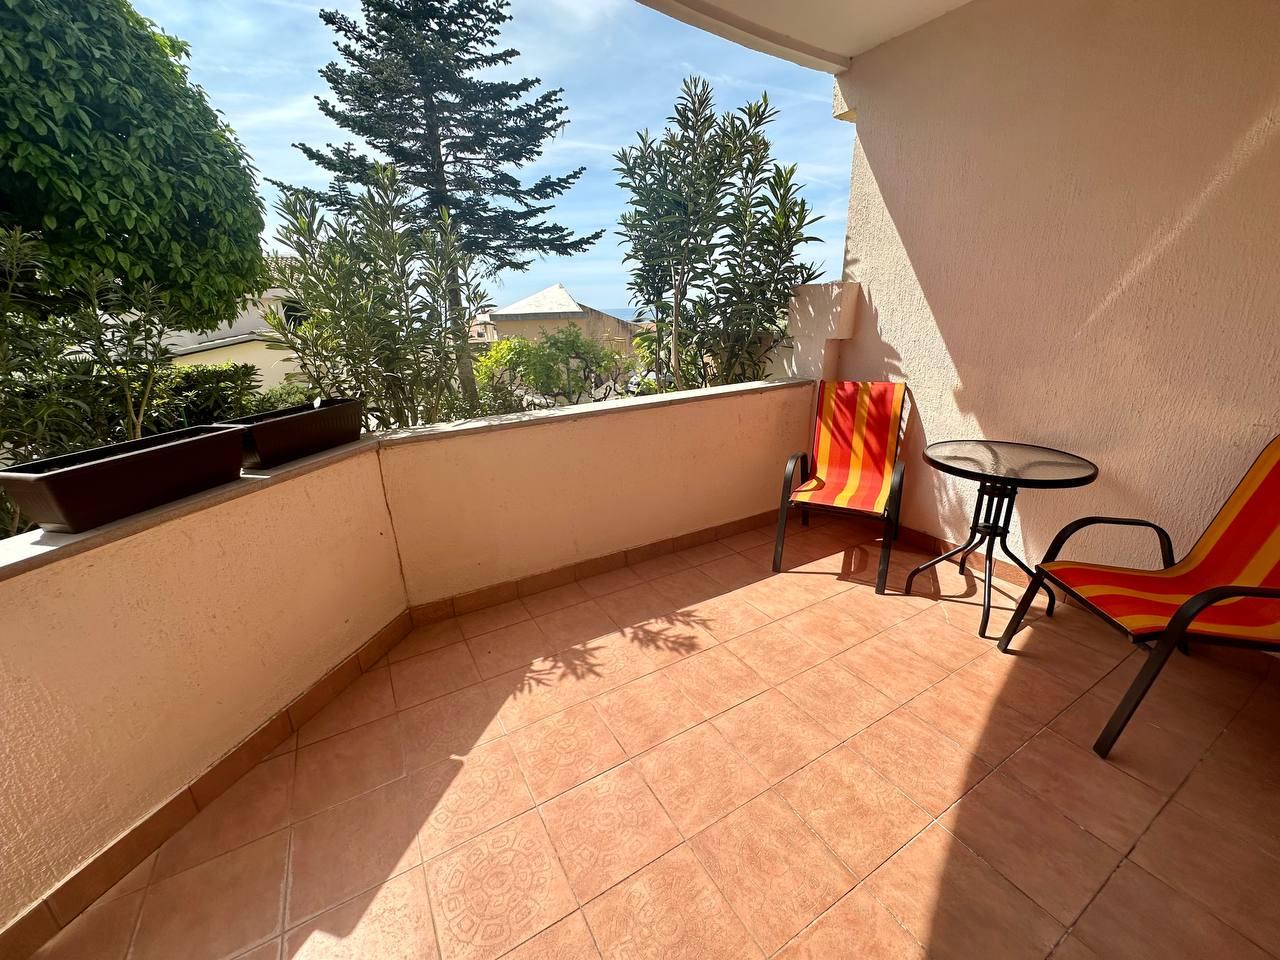 Seaview 2 bedrooms flat in Petrovac with terrace and garden 700m to sea